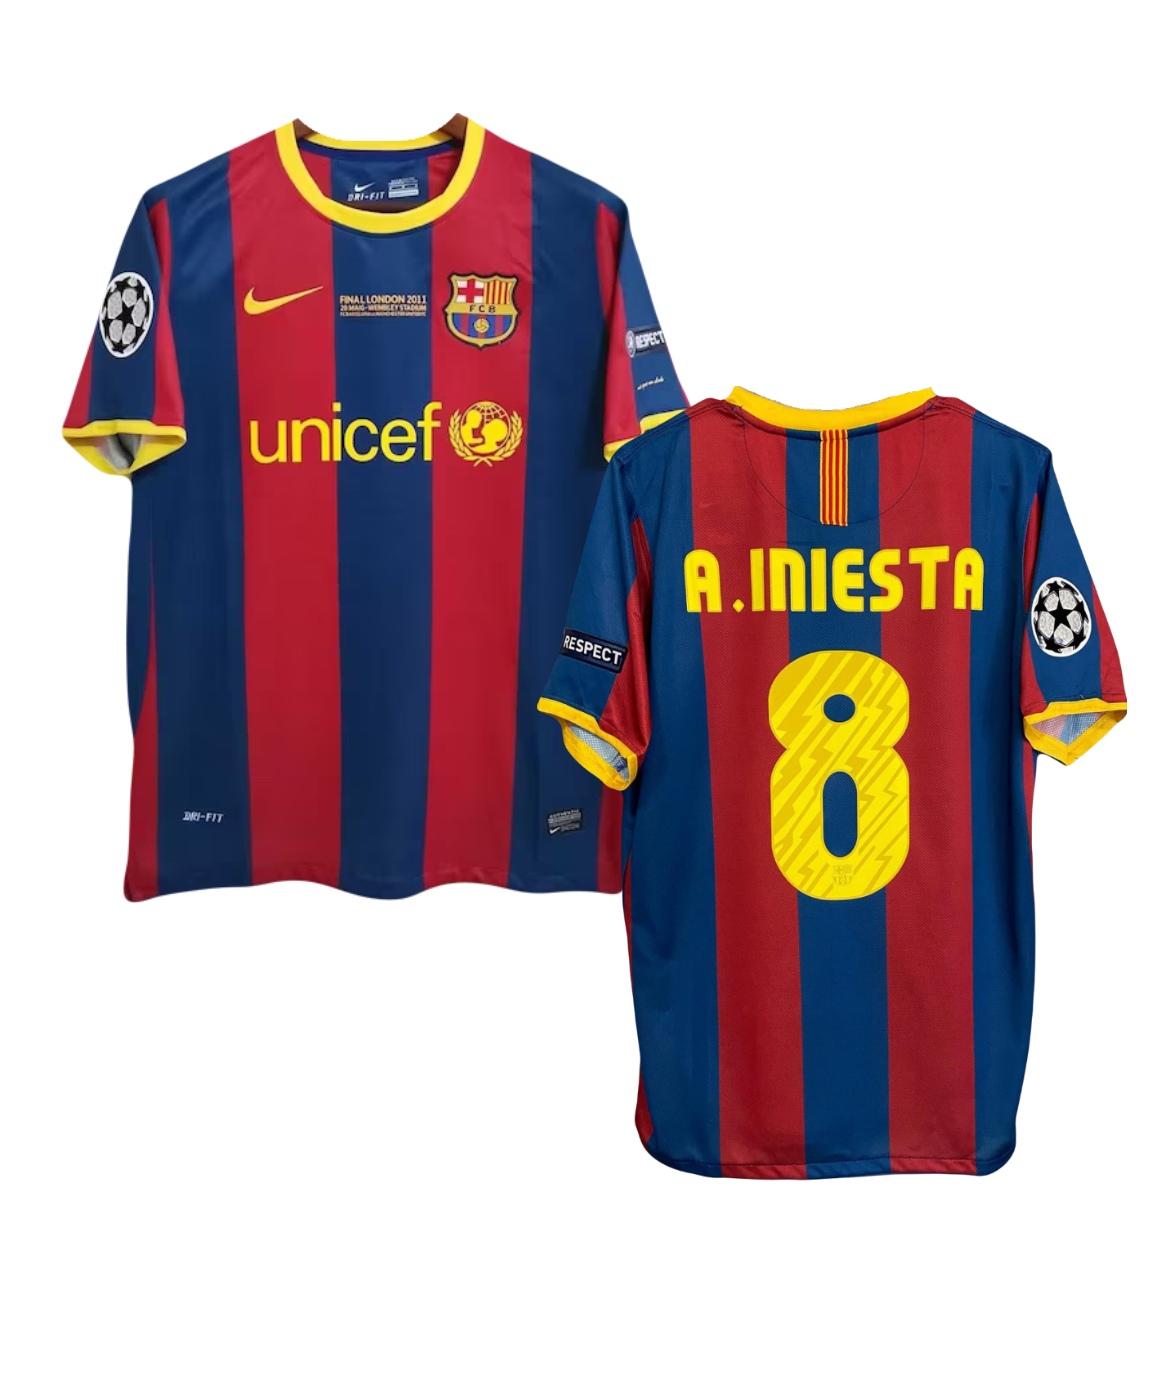 Andres Iniesta FC Barcelona Nike 2010/11 UEFA Champions League Final Authentic Home Jersey - Blue & Red